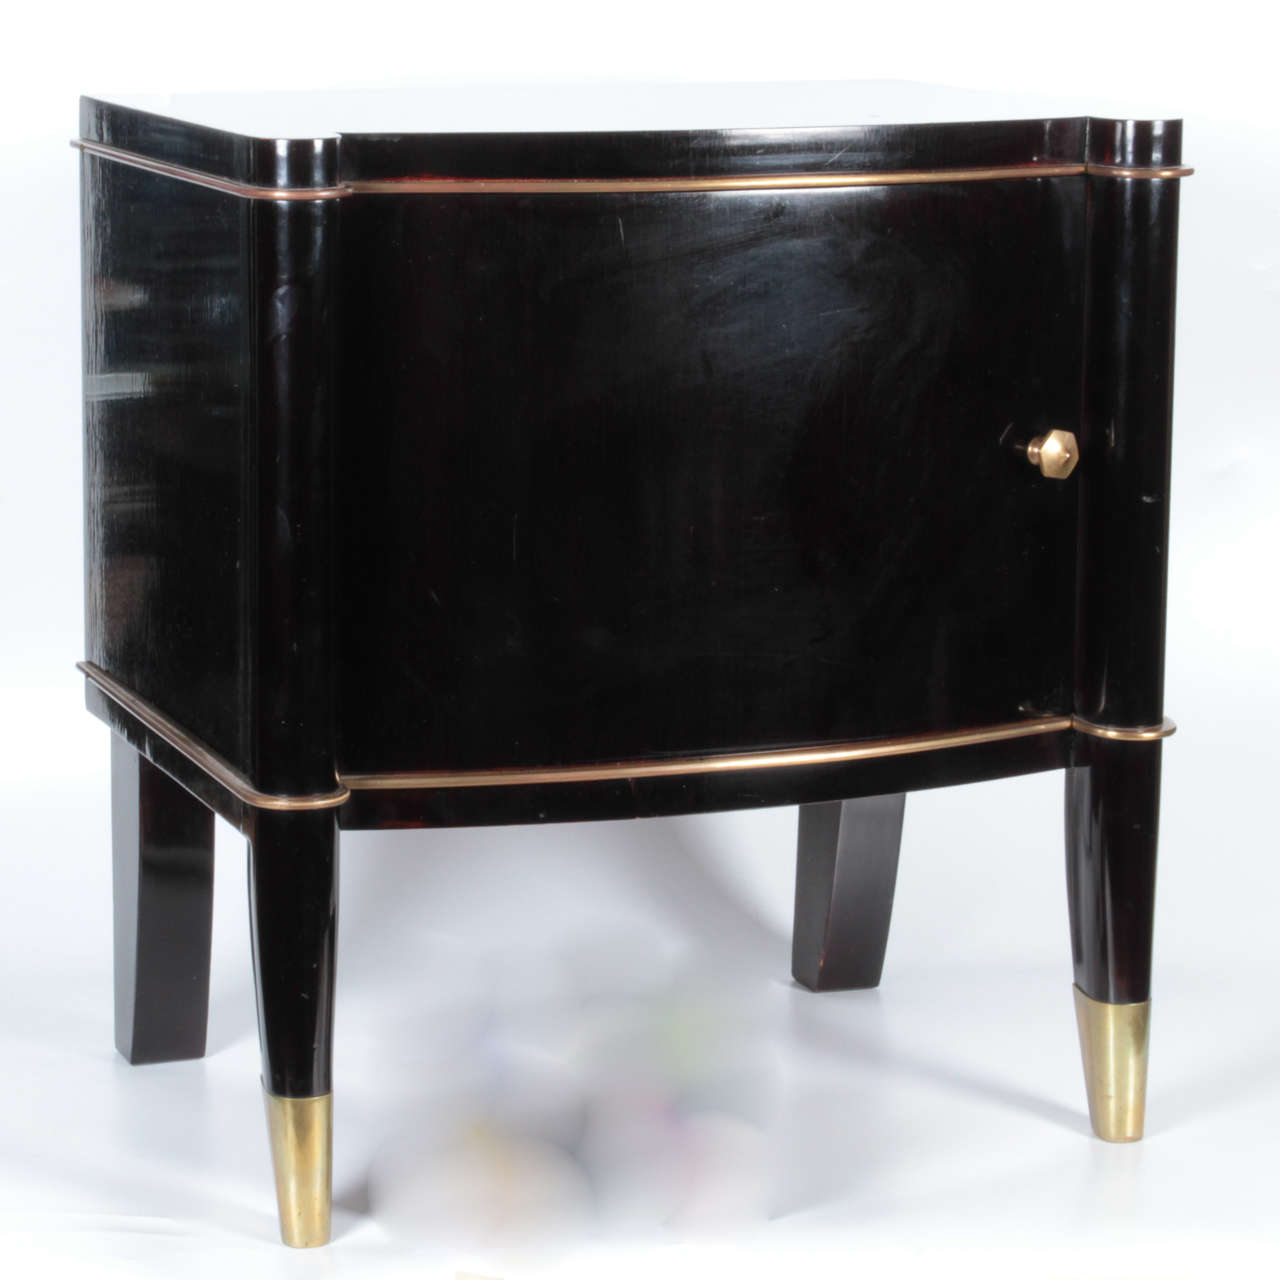 Pair of antique French Art Deco black lacquer and gilt bronze side cabinets or tables. There is gilt bronze feet, knobs and trim around the cabinets. The inside of the side cabinets are finished, circa 1930.